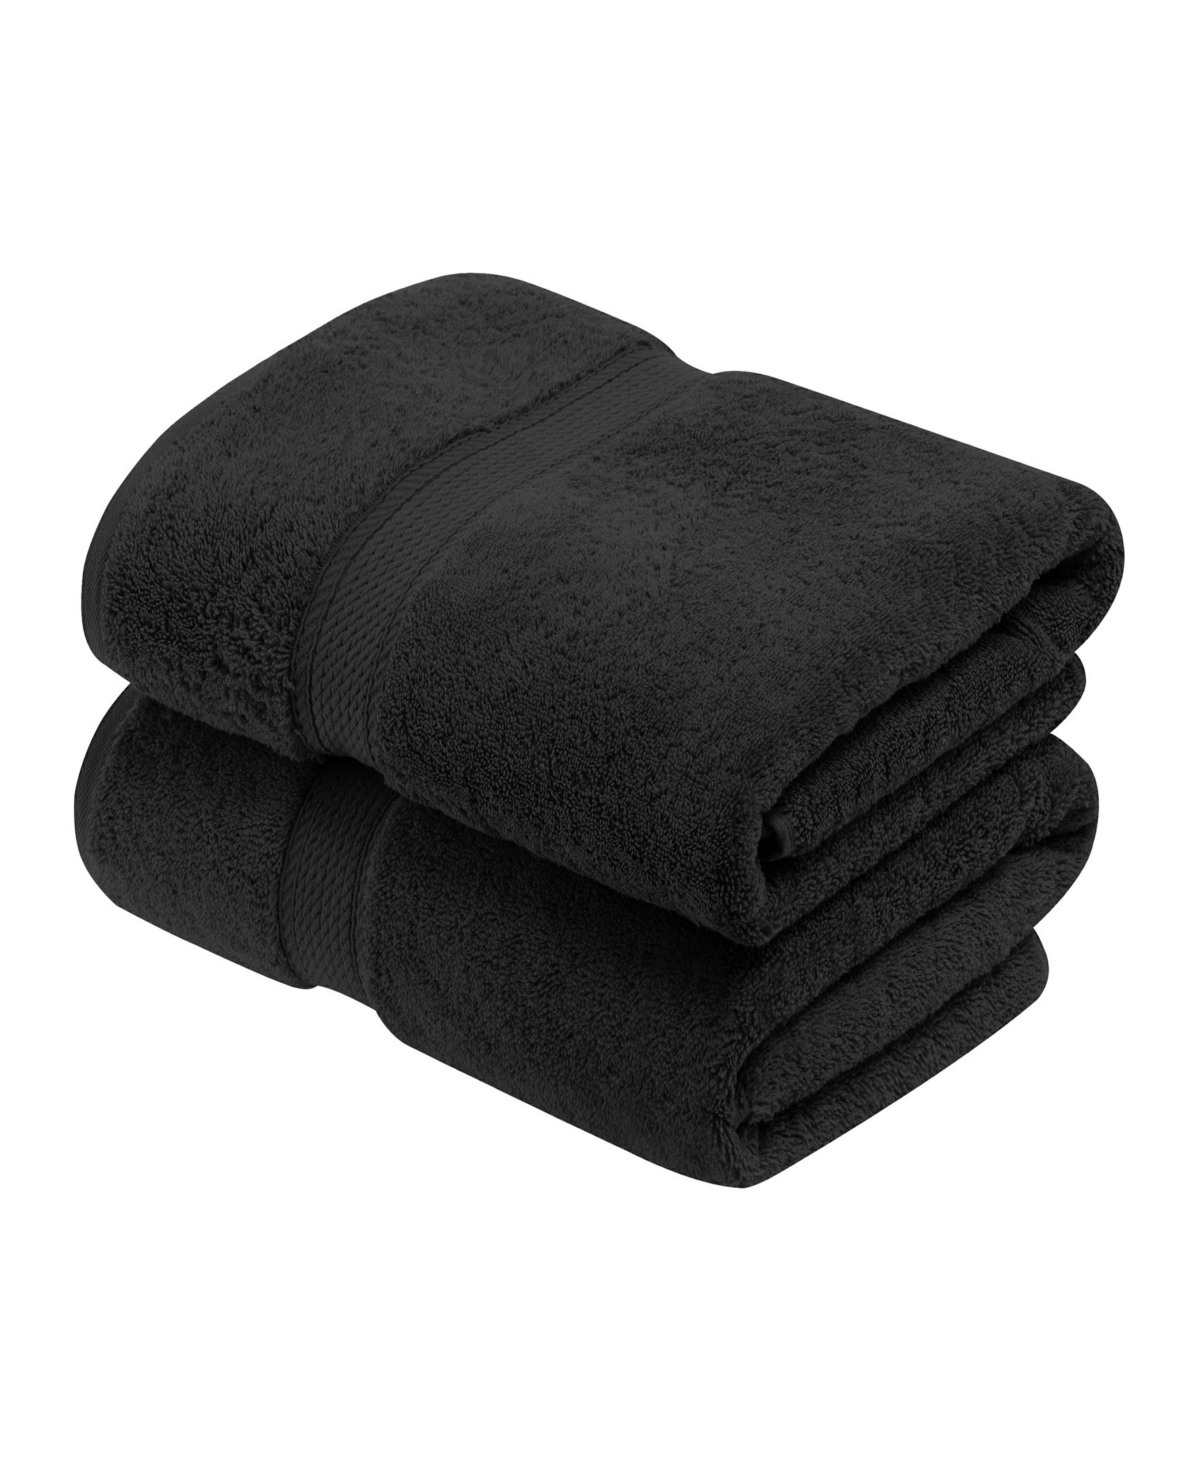 Superior Highly Absorbent Egyptian Cotton 2-piece Ultra Plush Solid Bath Towel Set Bedding In Black